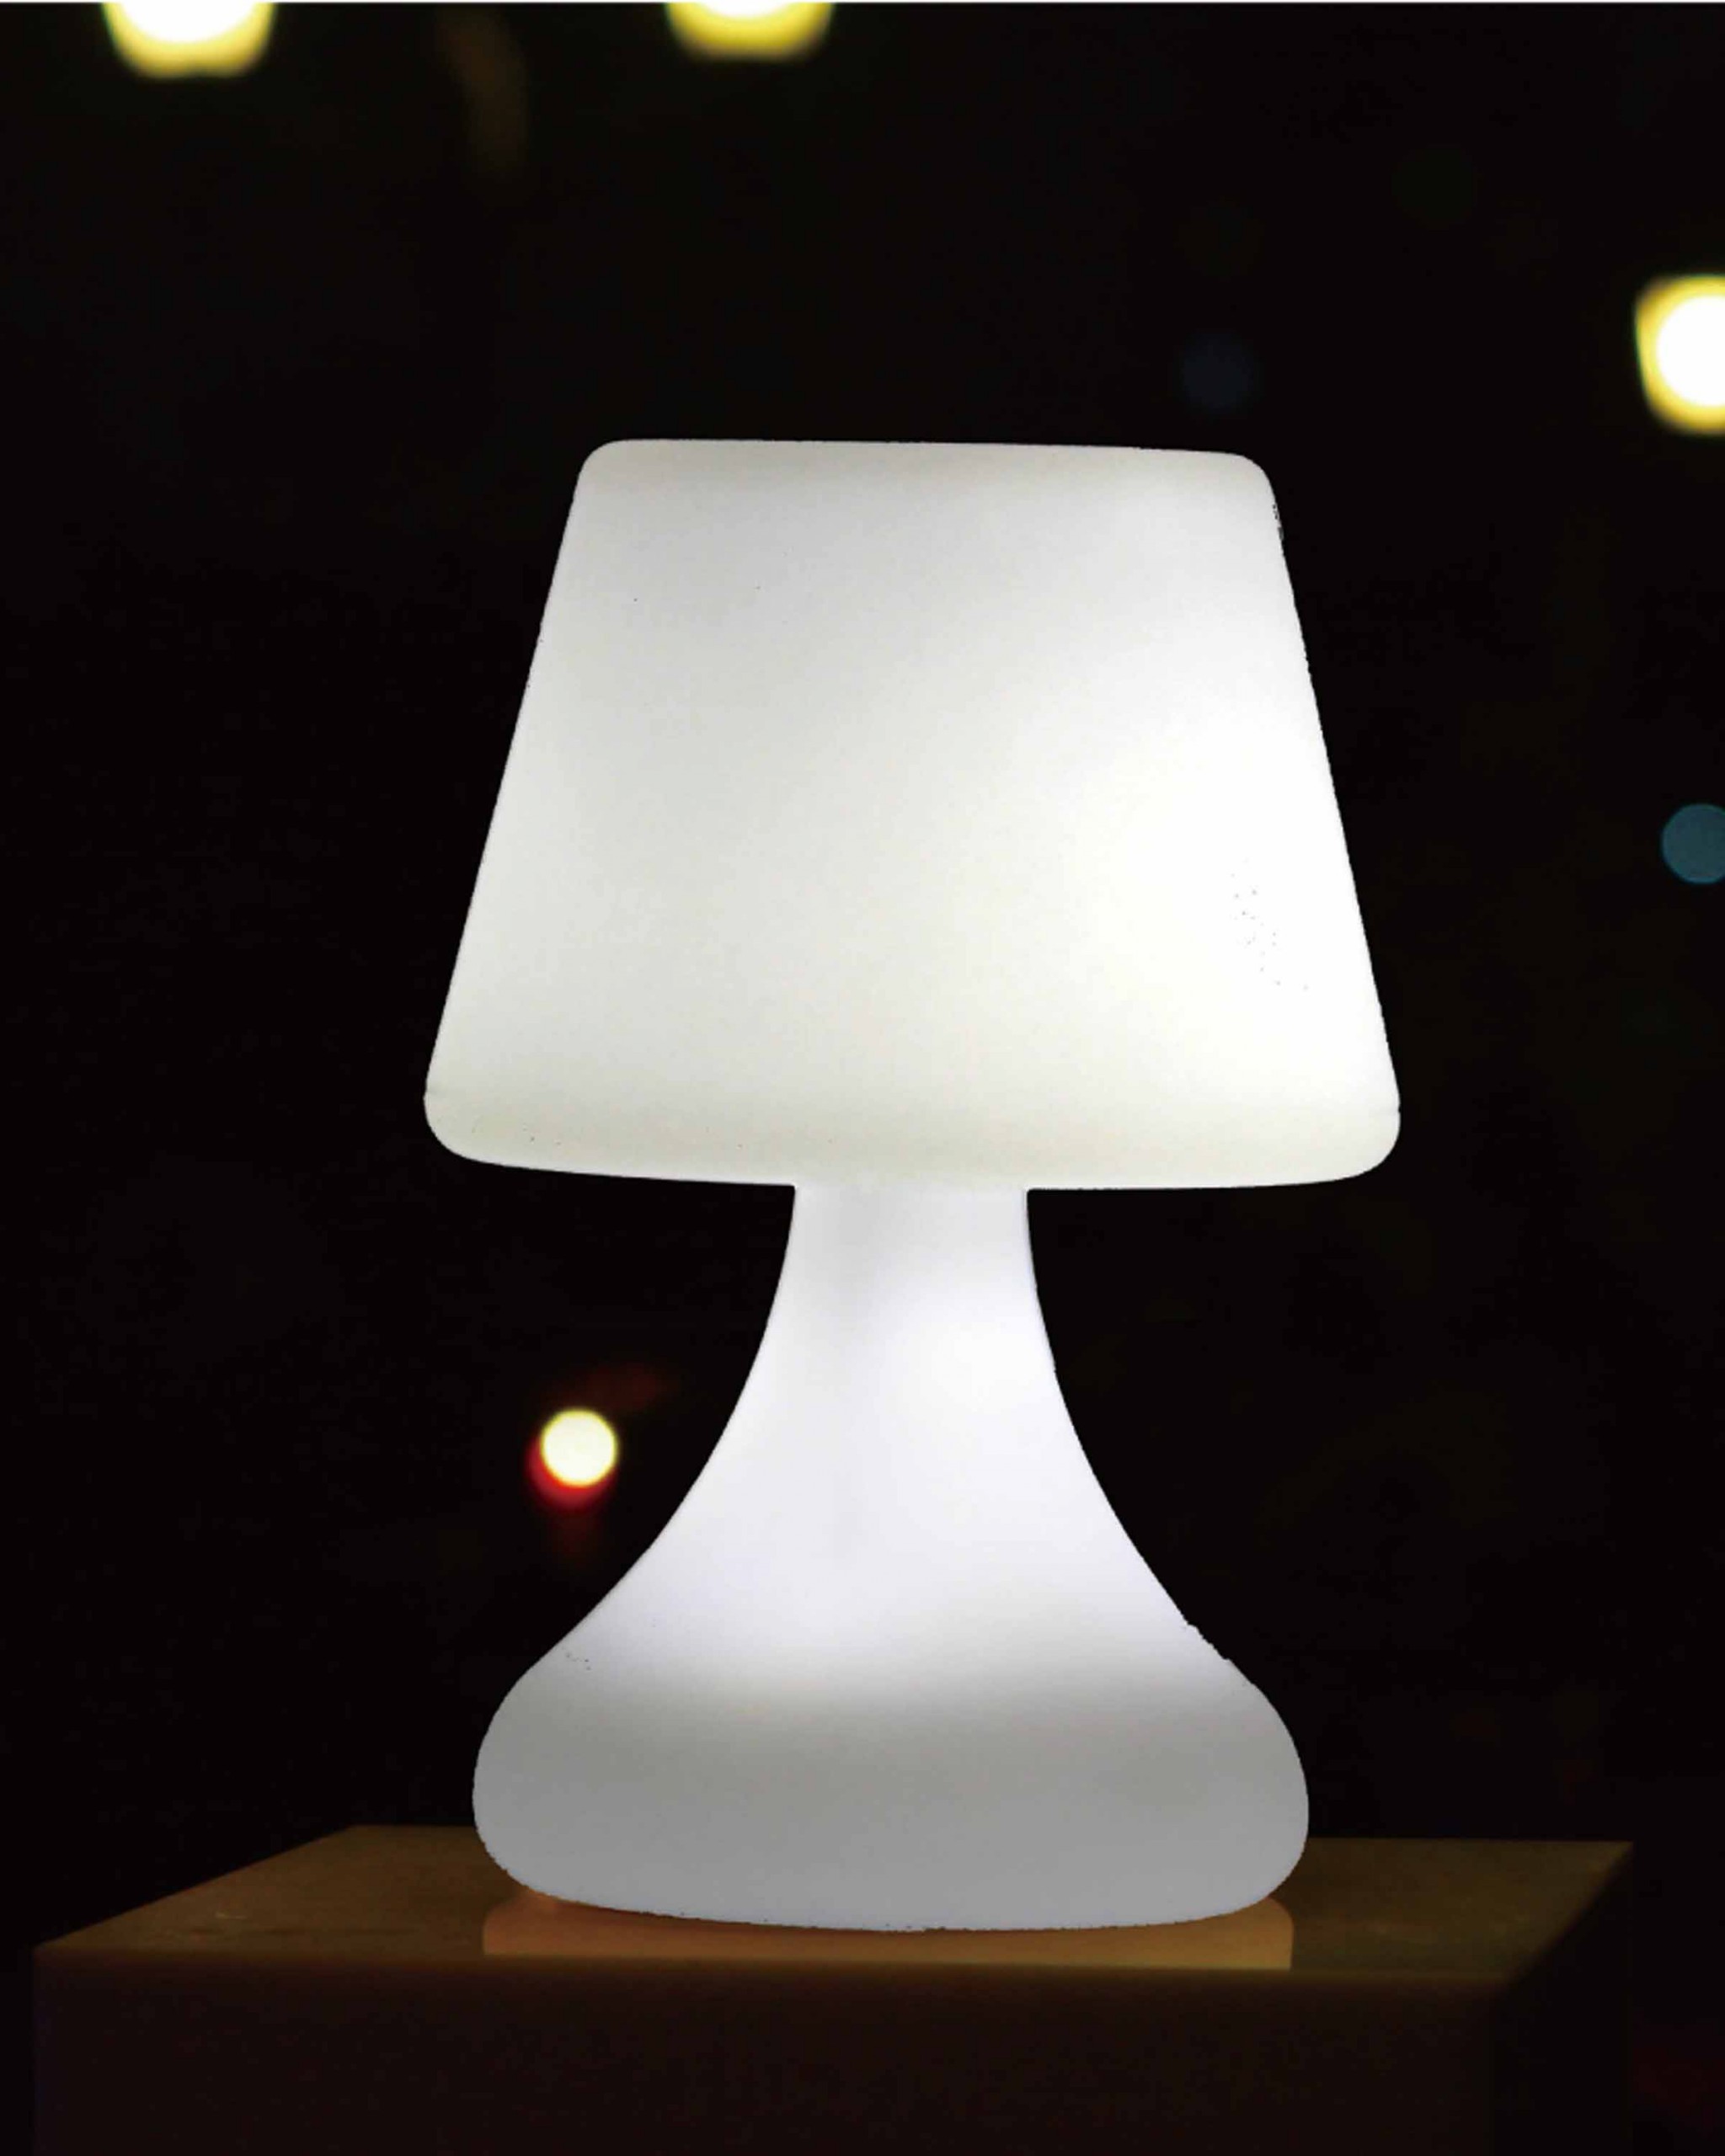 10" X 7" X 7" White PE Plastic LED Table Lamp with Bluetooth Speaker